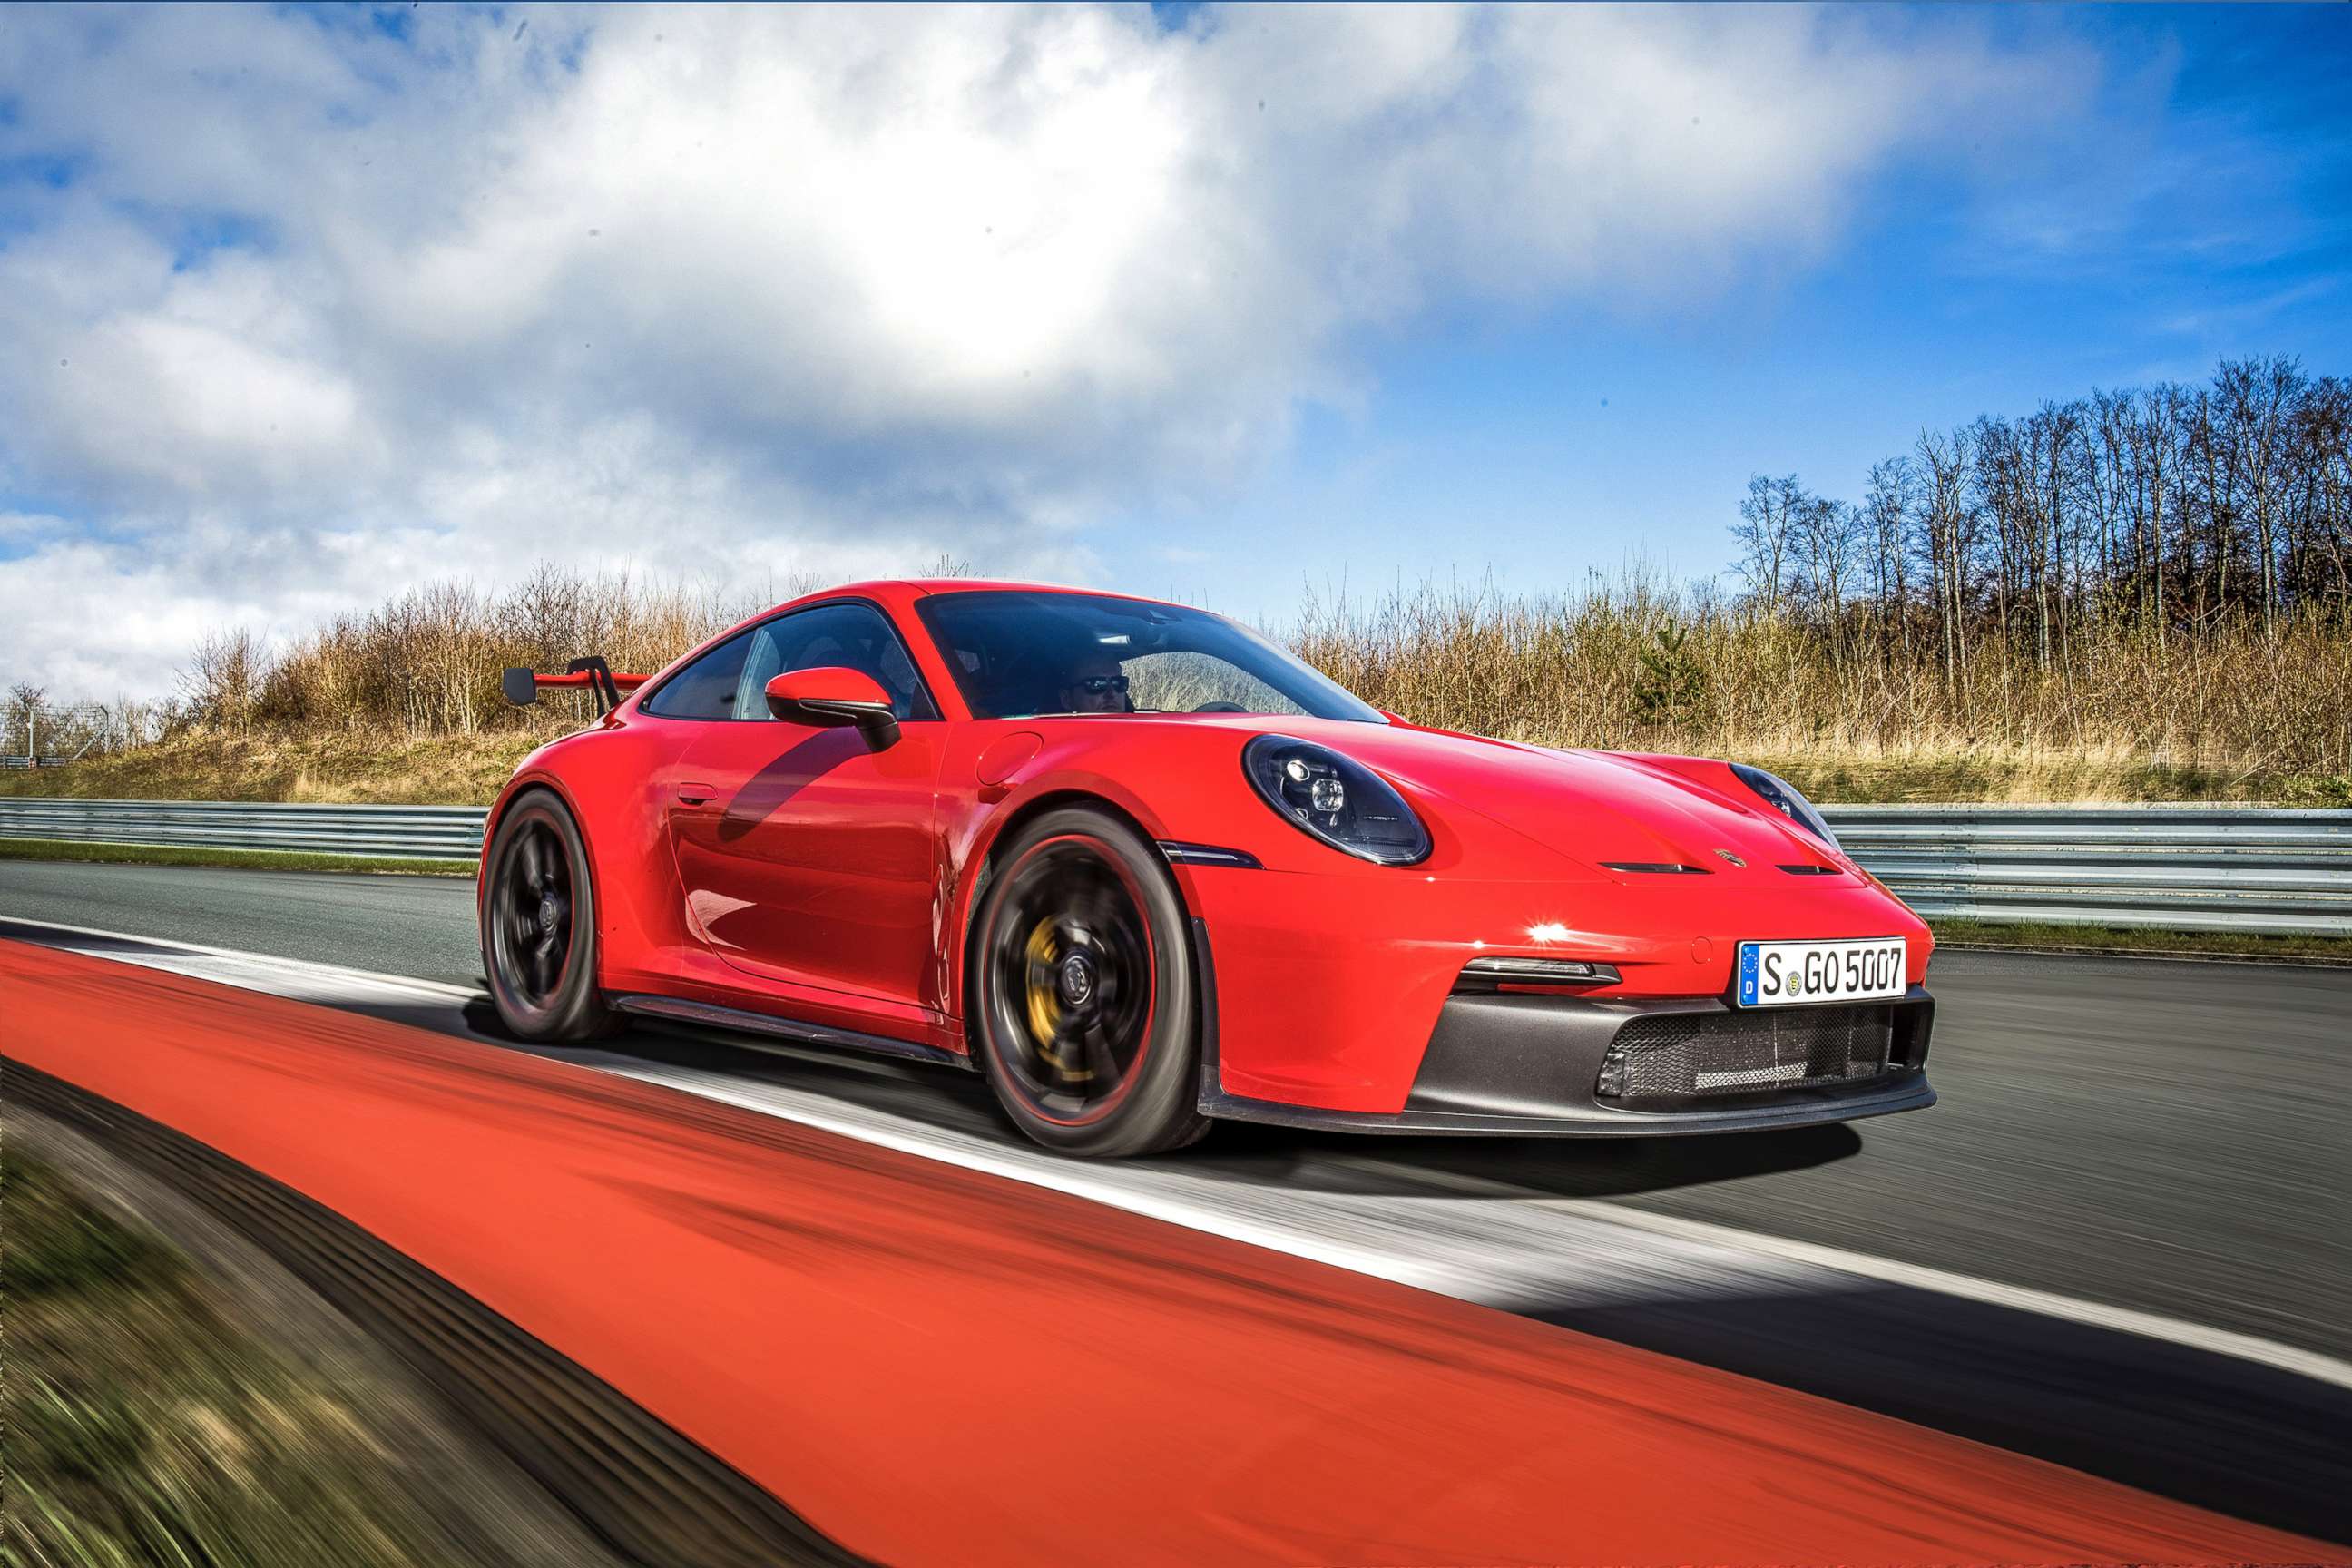 PHOTO: The Porsche GT3 sports car is the German automaker's most visceral variant of the iconic 911.